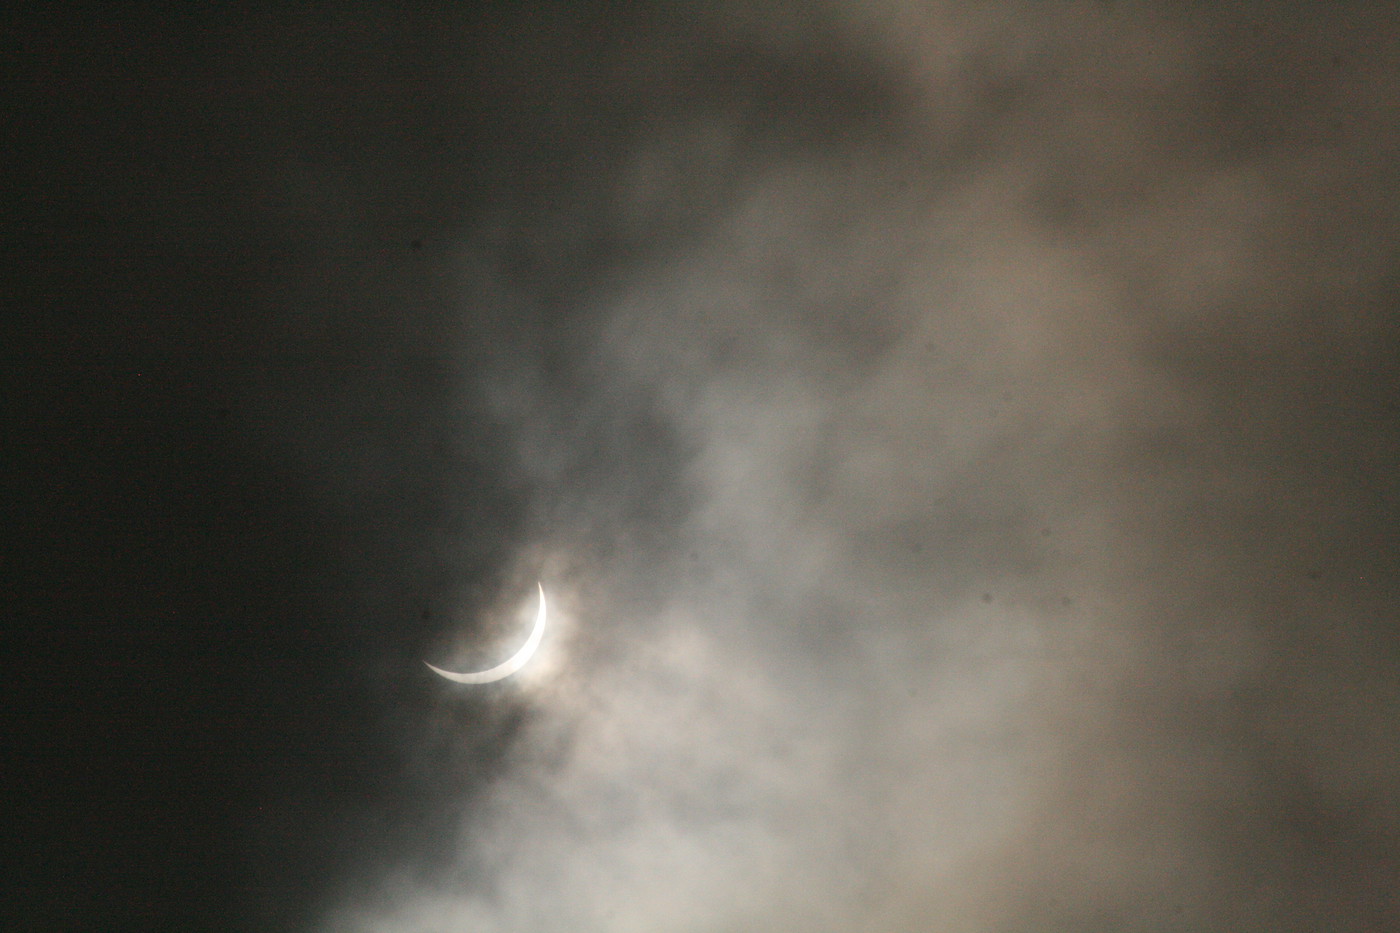 Just before totality